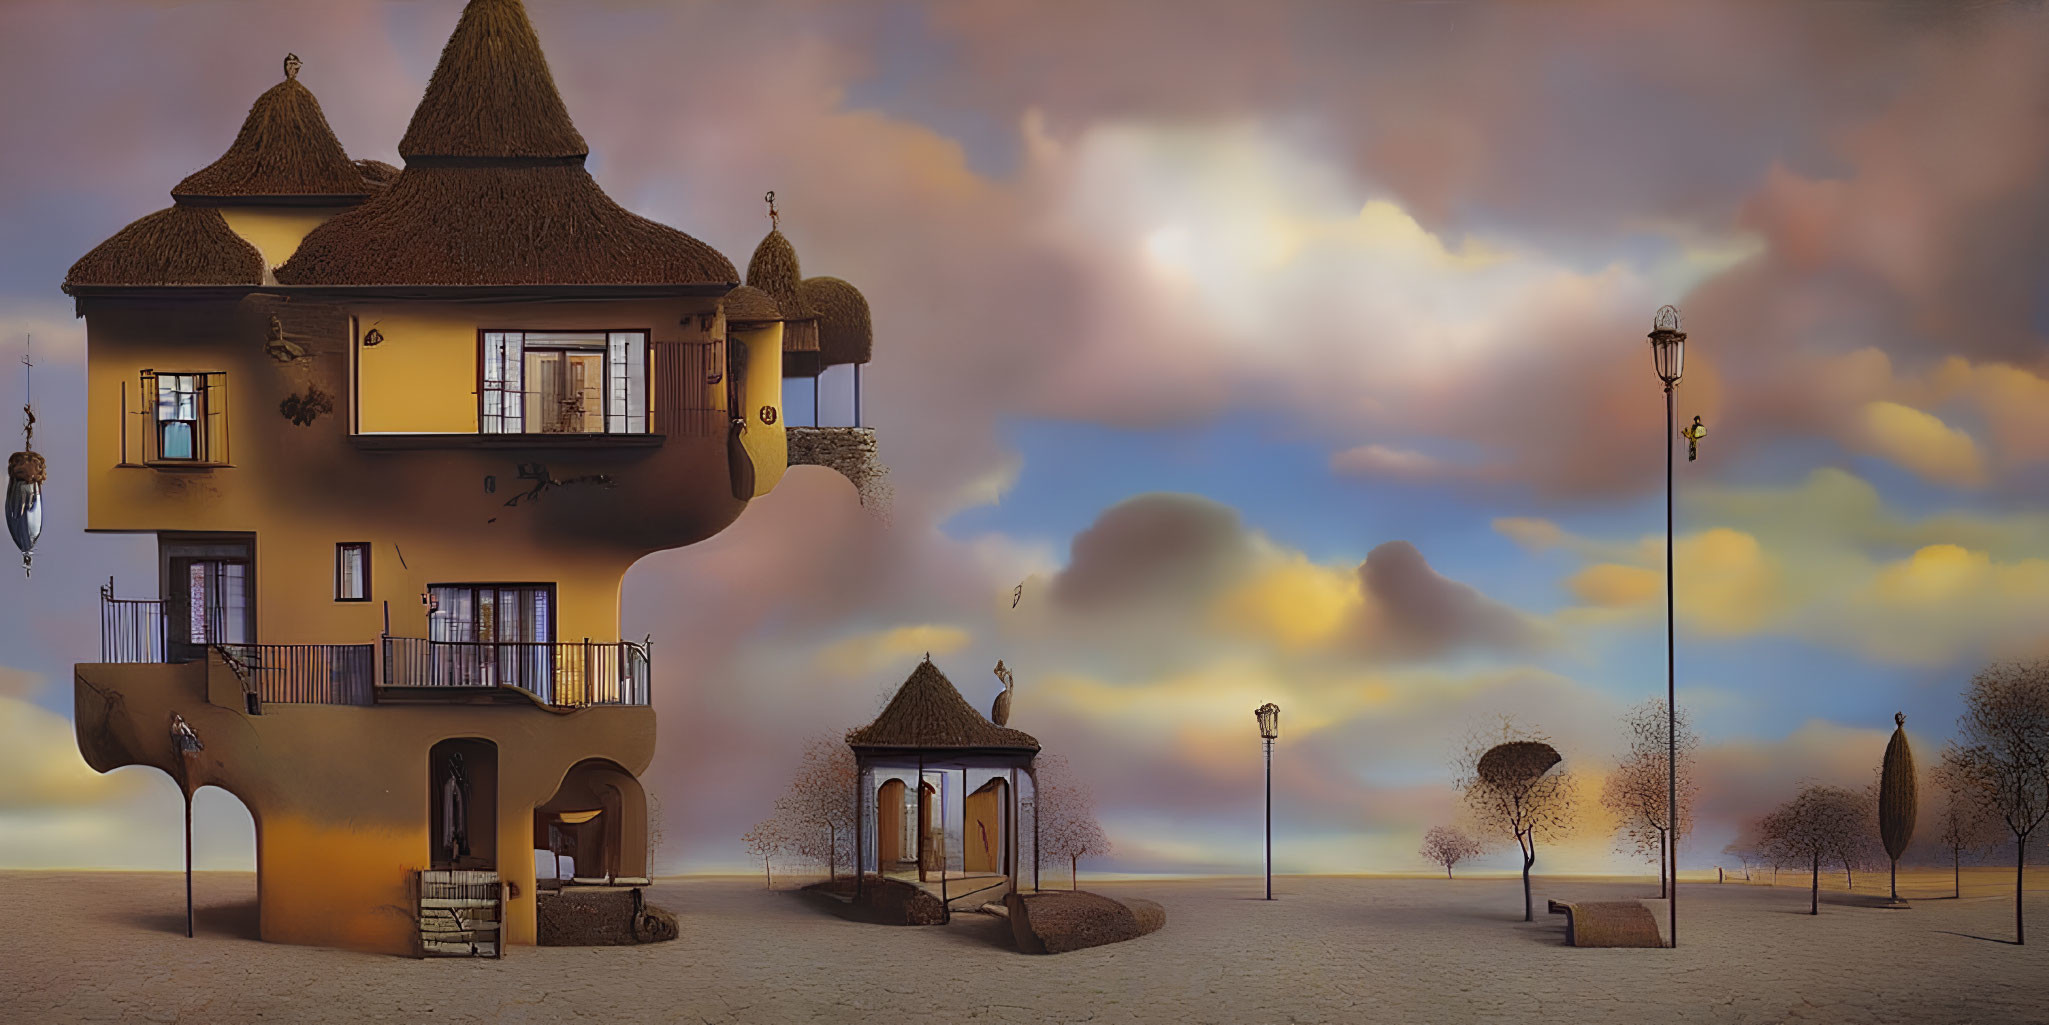 Surreal inverted house in twilight landscape with floating elements